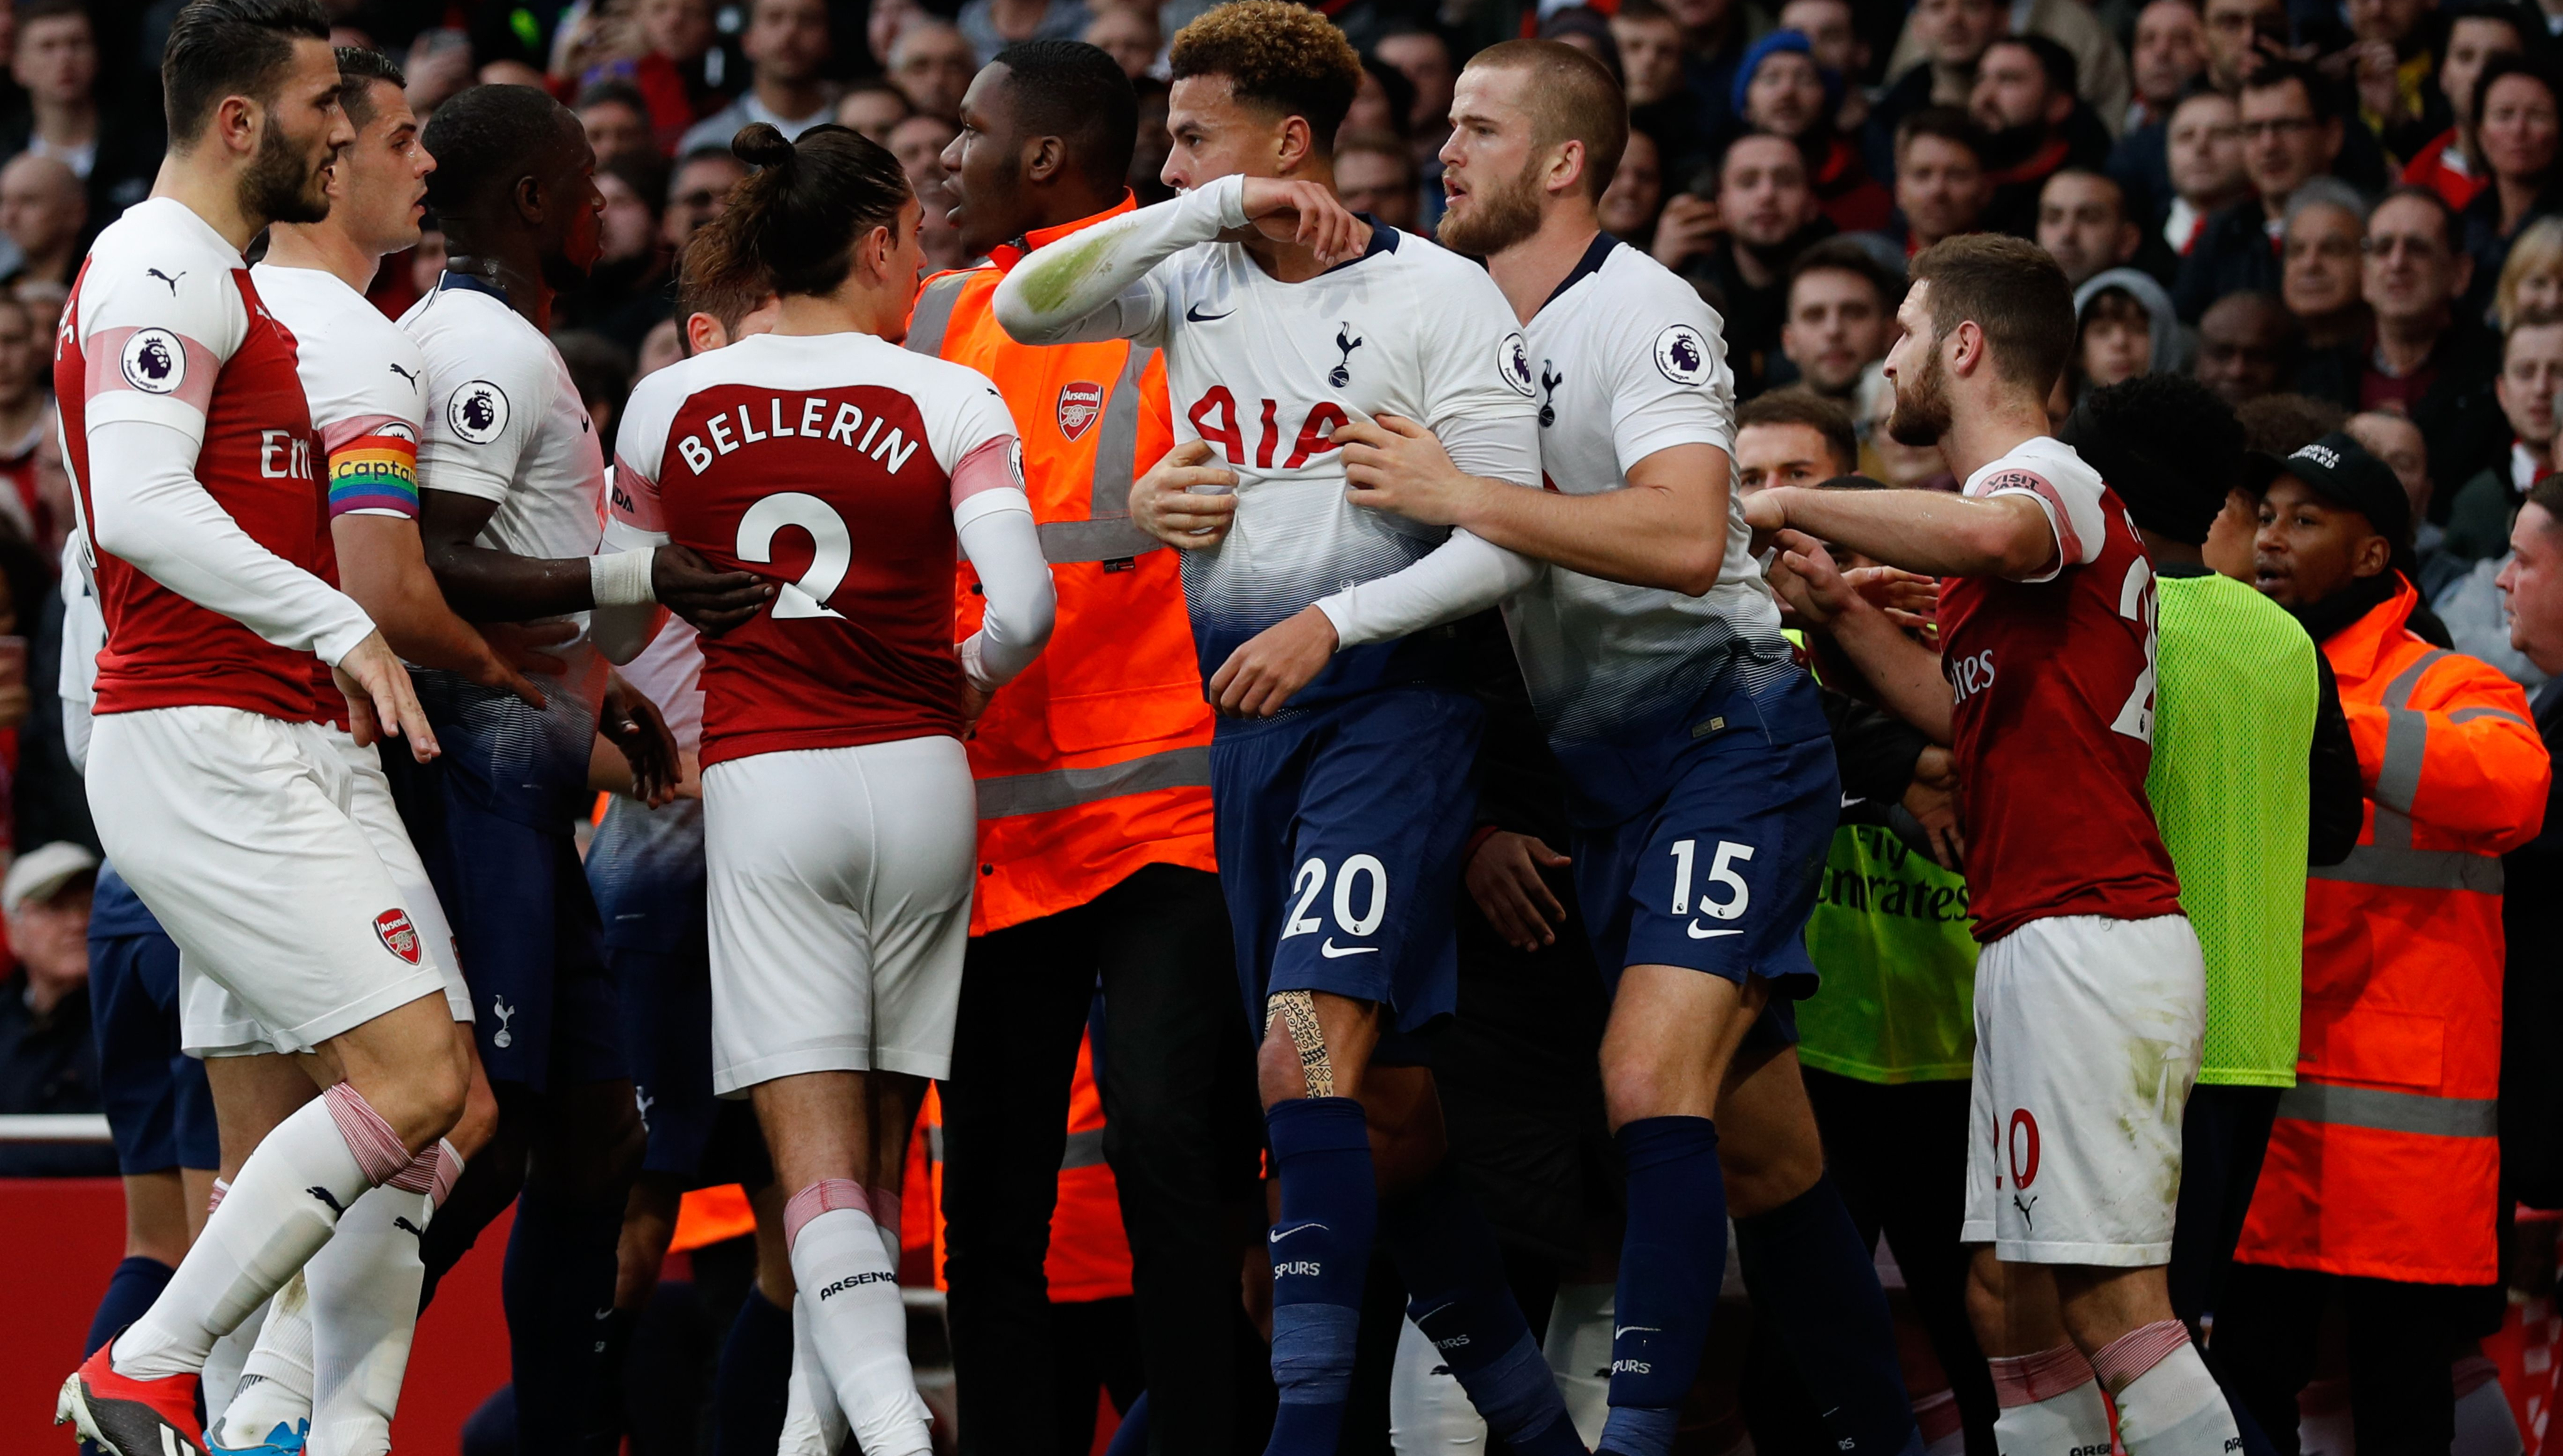 North London derby news: Trouble mars north London derby ...